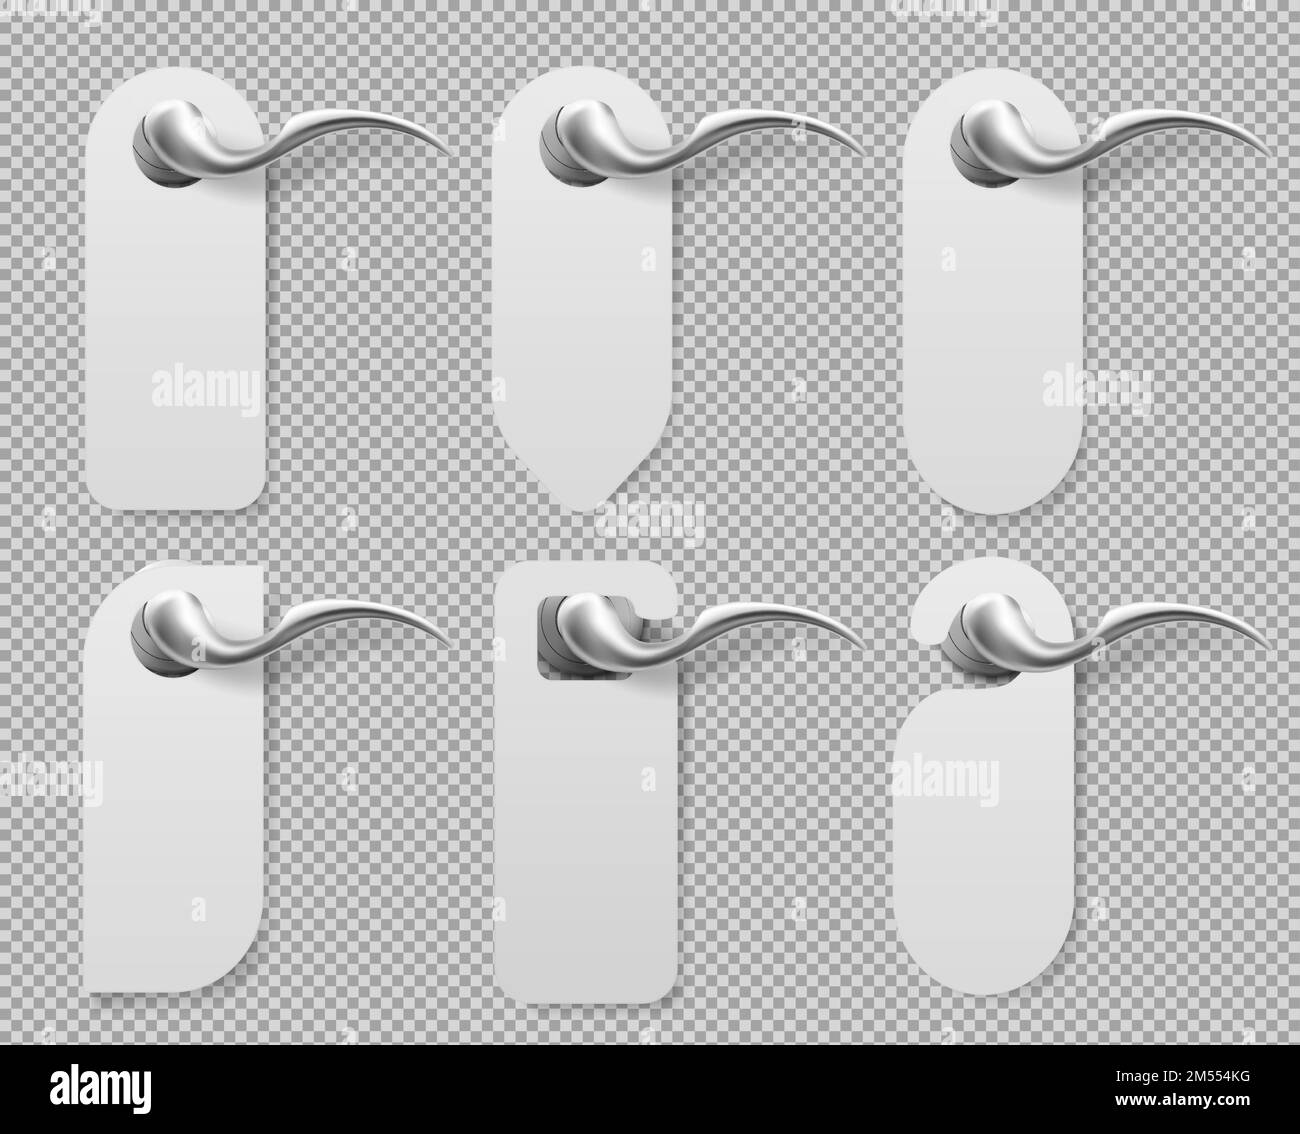 Door hangers on metal handles mockup set. Blank paper or plastic empty labels of various shapes for hotel doorknob room, dont disturb signs, messages on entrance knobs, Realistic 3d vector mock up Stock Vector